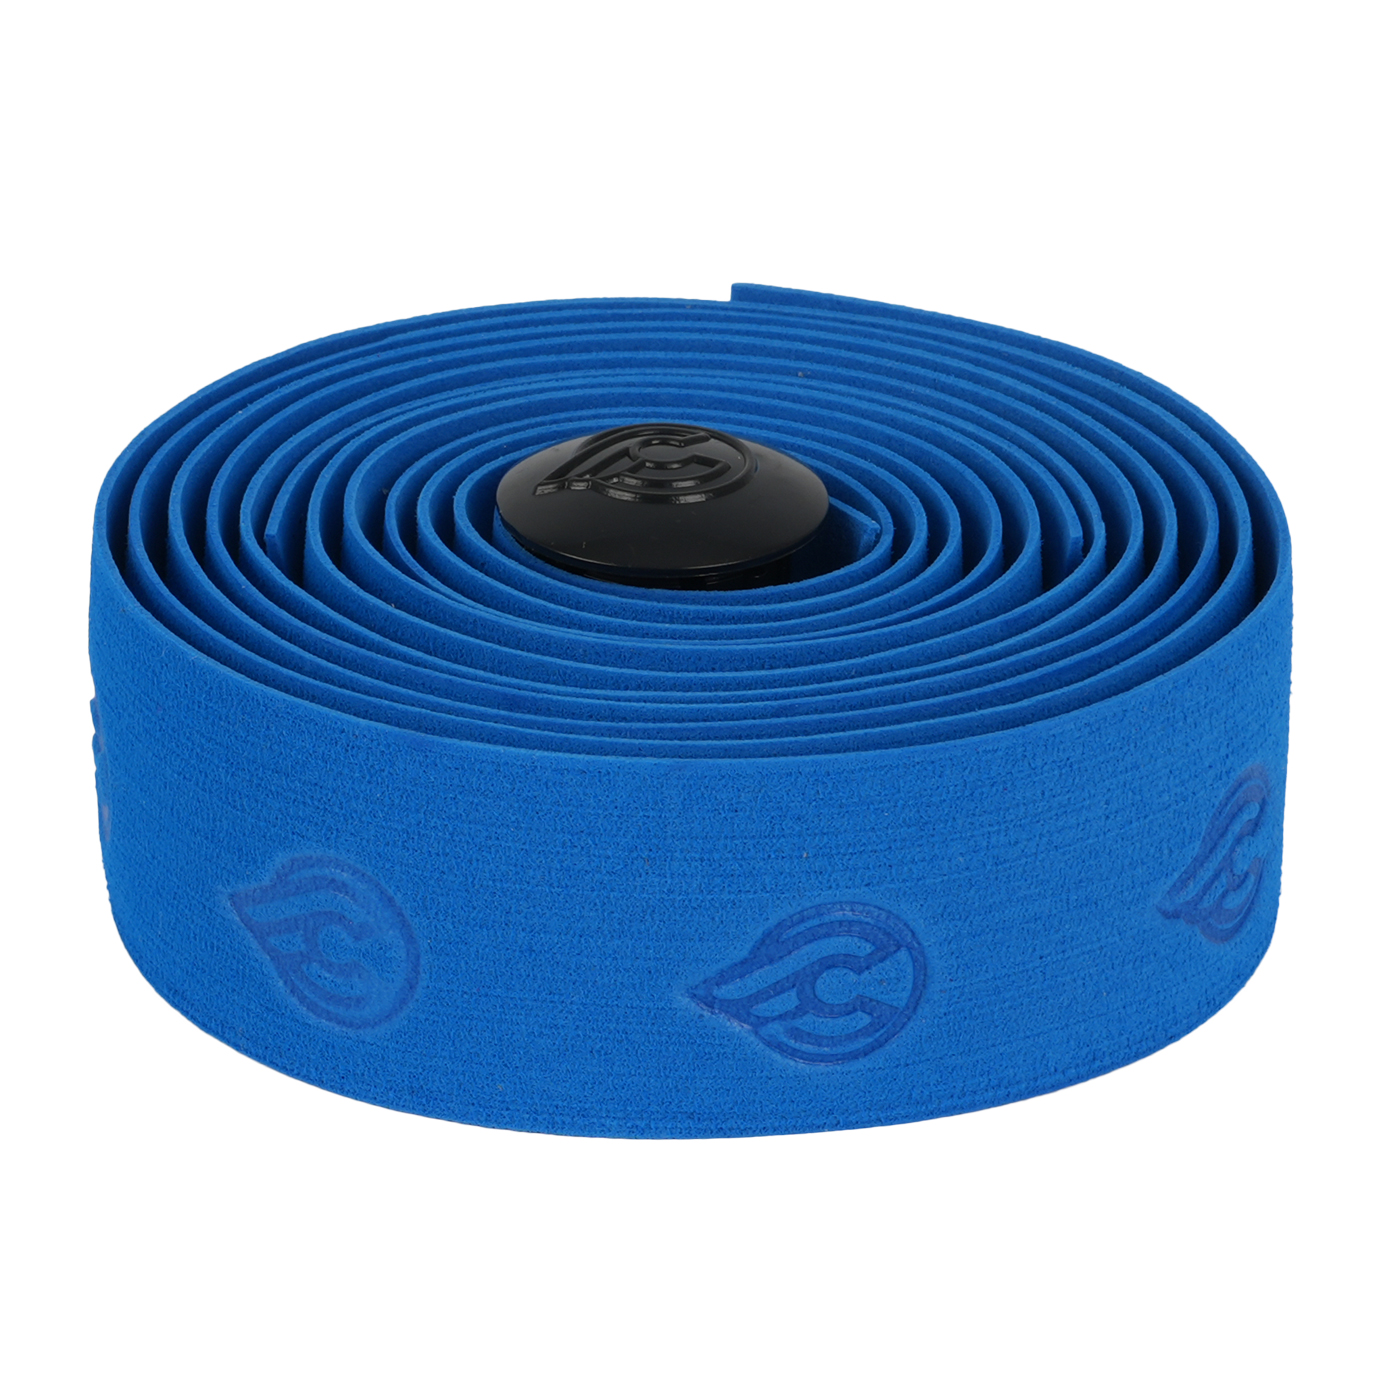 Picture of Cinelli Wave - Handlebar Tape - blue